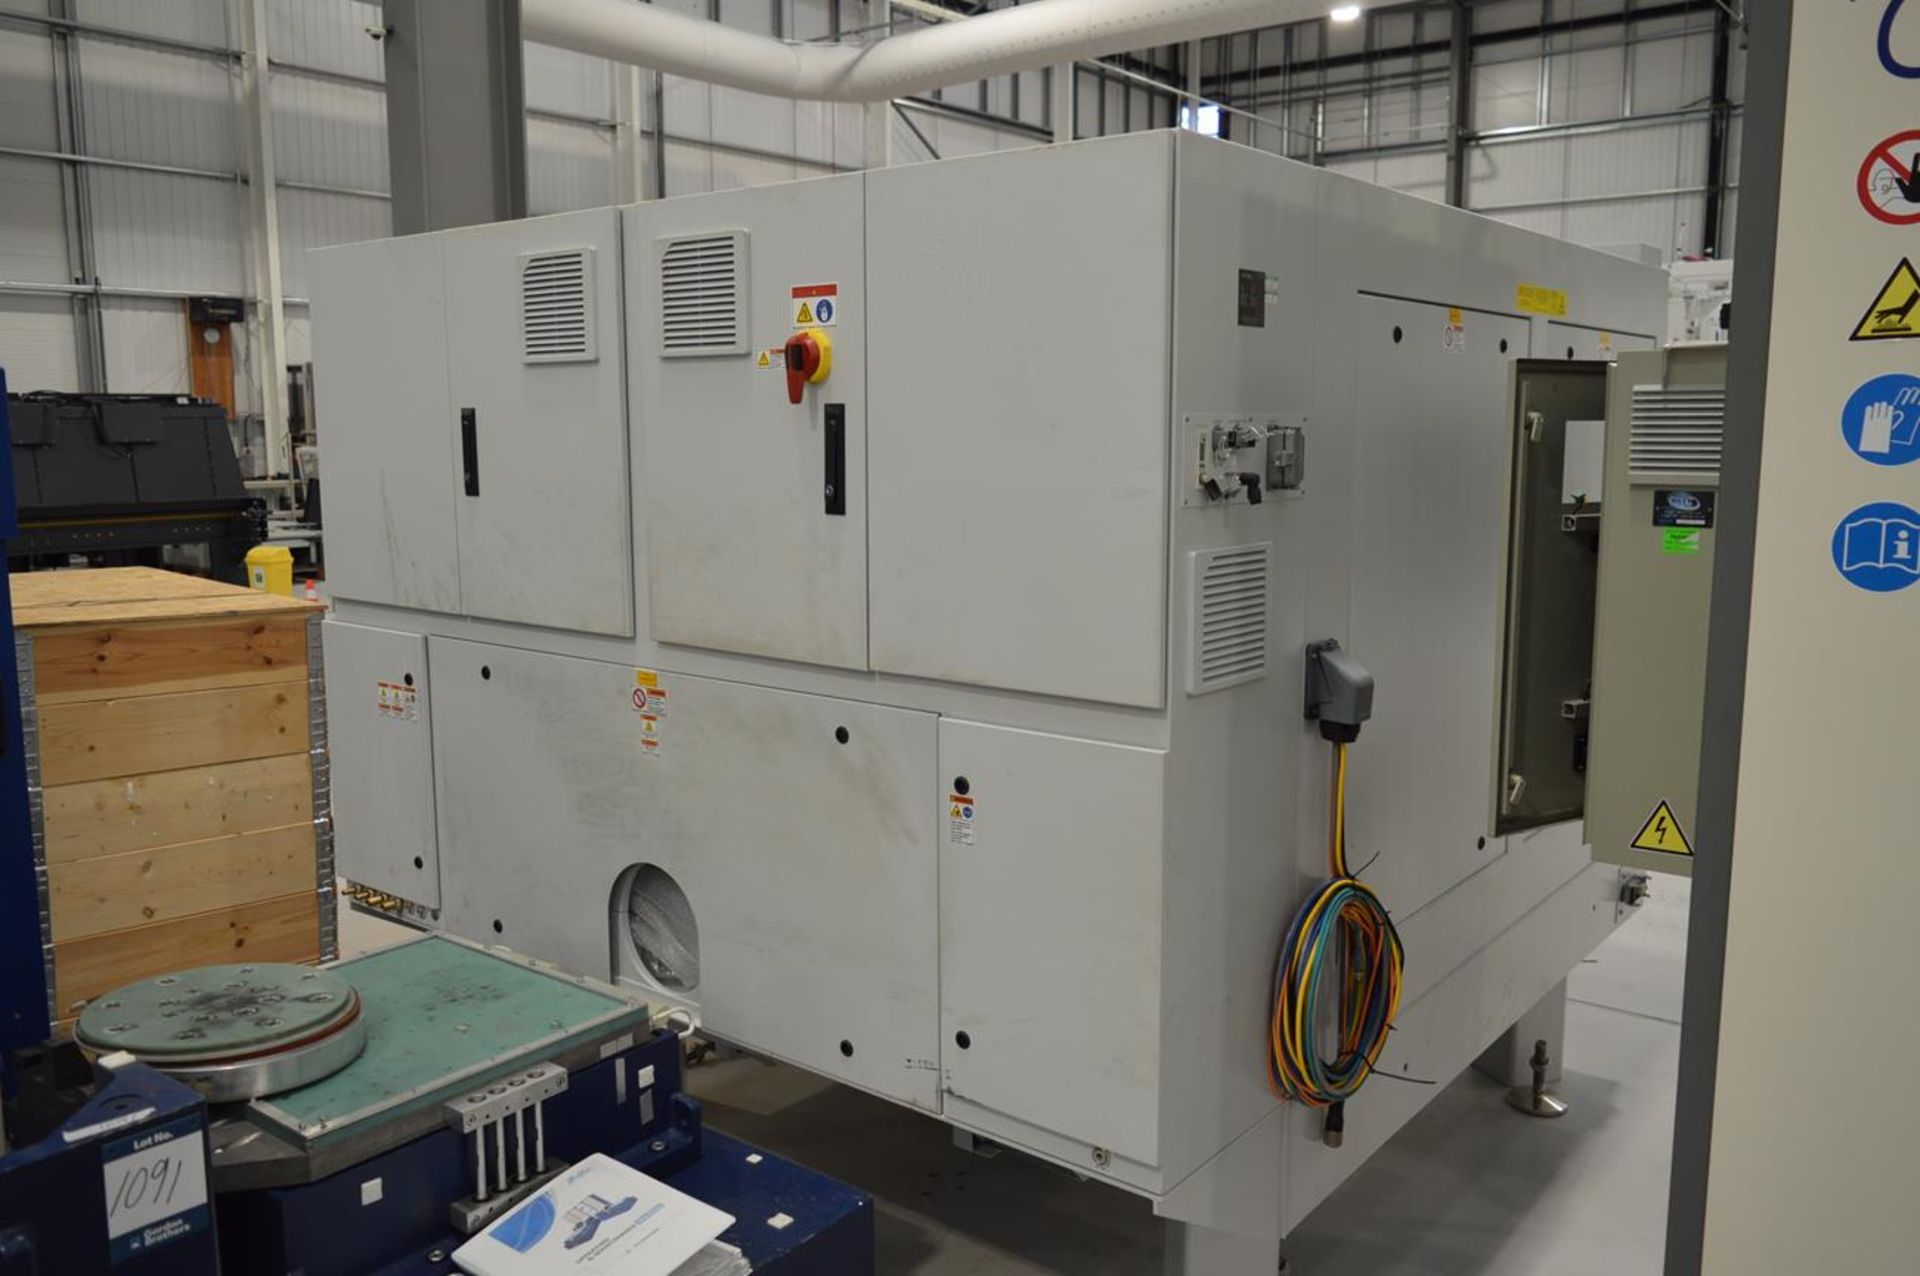 IPG Photonics, 1.5kw laser welding system with IPG YLR-1500-WC fibre laser source, No. PLMP32200563 - Image 7 of 10